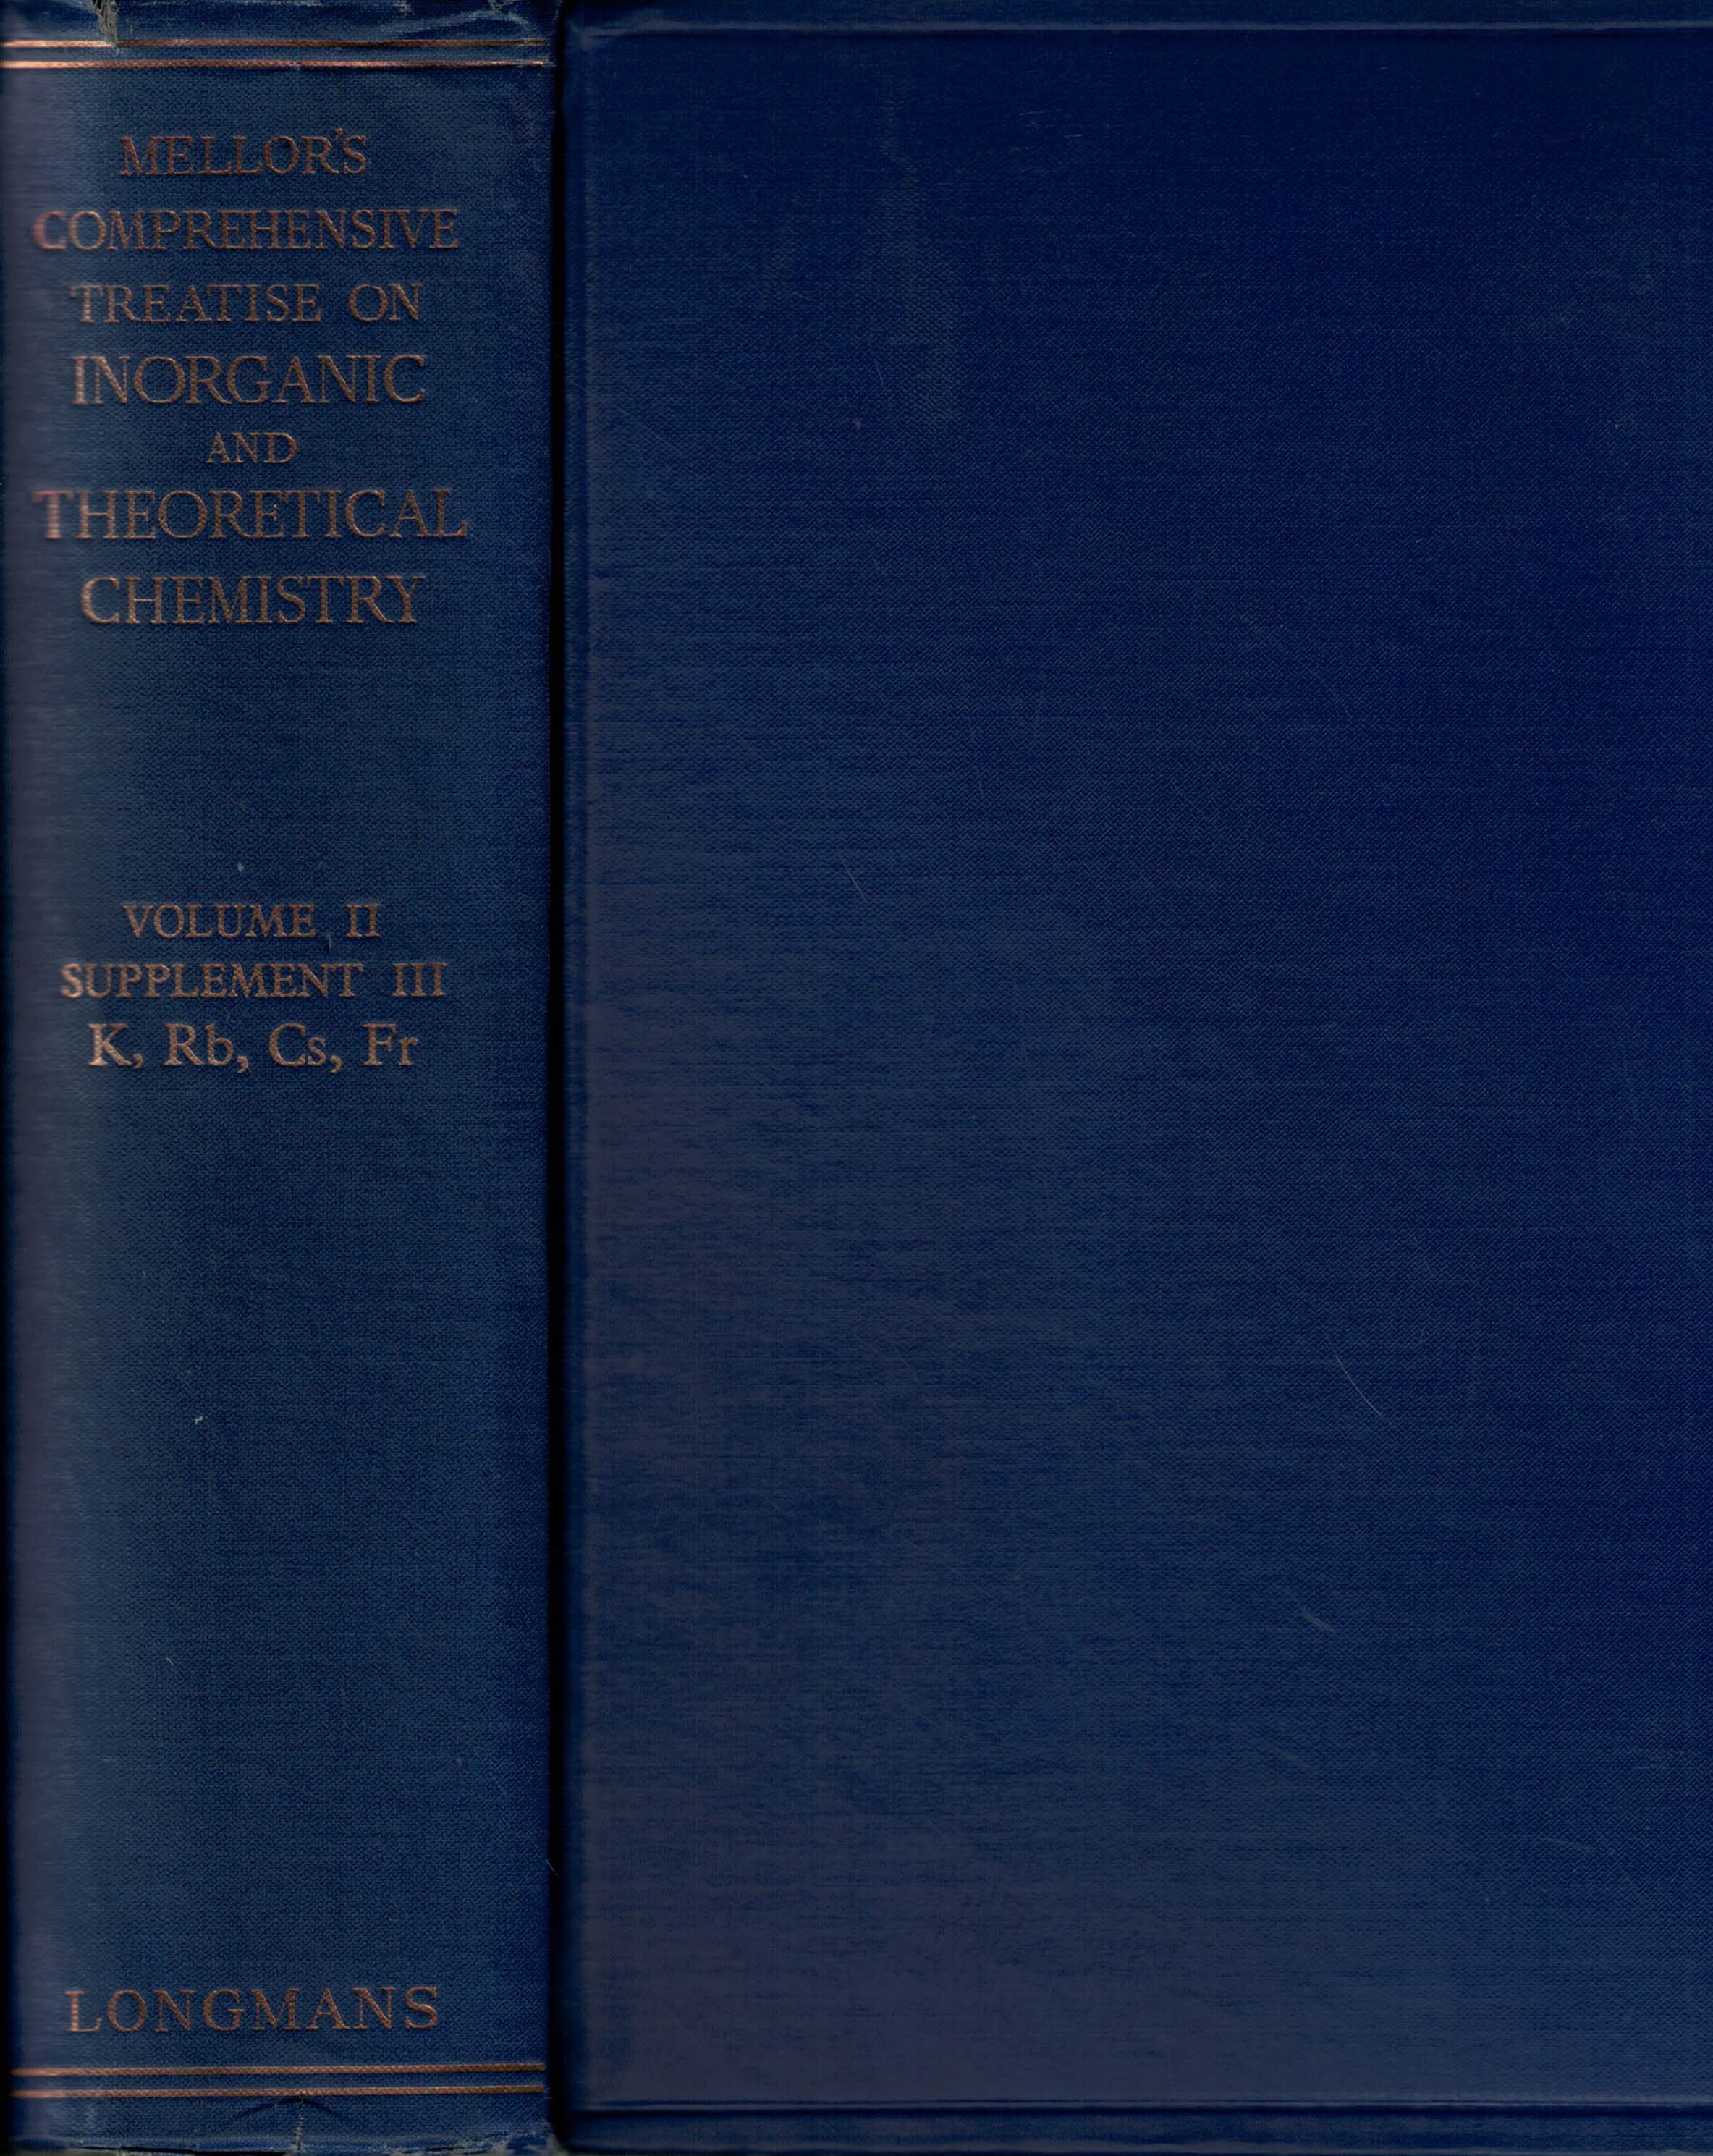 A Comprehensive Treatise on Inorganic and Theoretical Chemistry. Volume II, Part III. K, Rb, Cs, Fr. The Alkali Metals, Part 2.